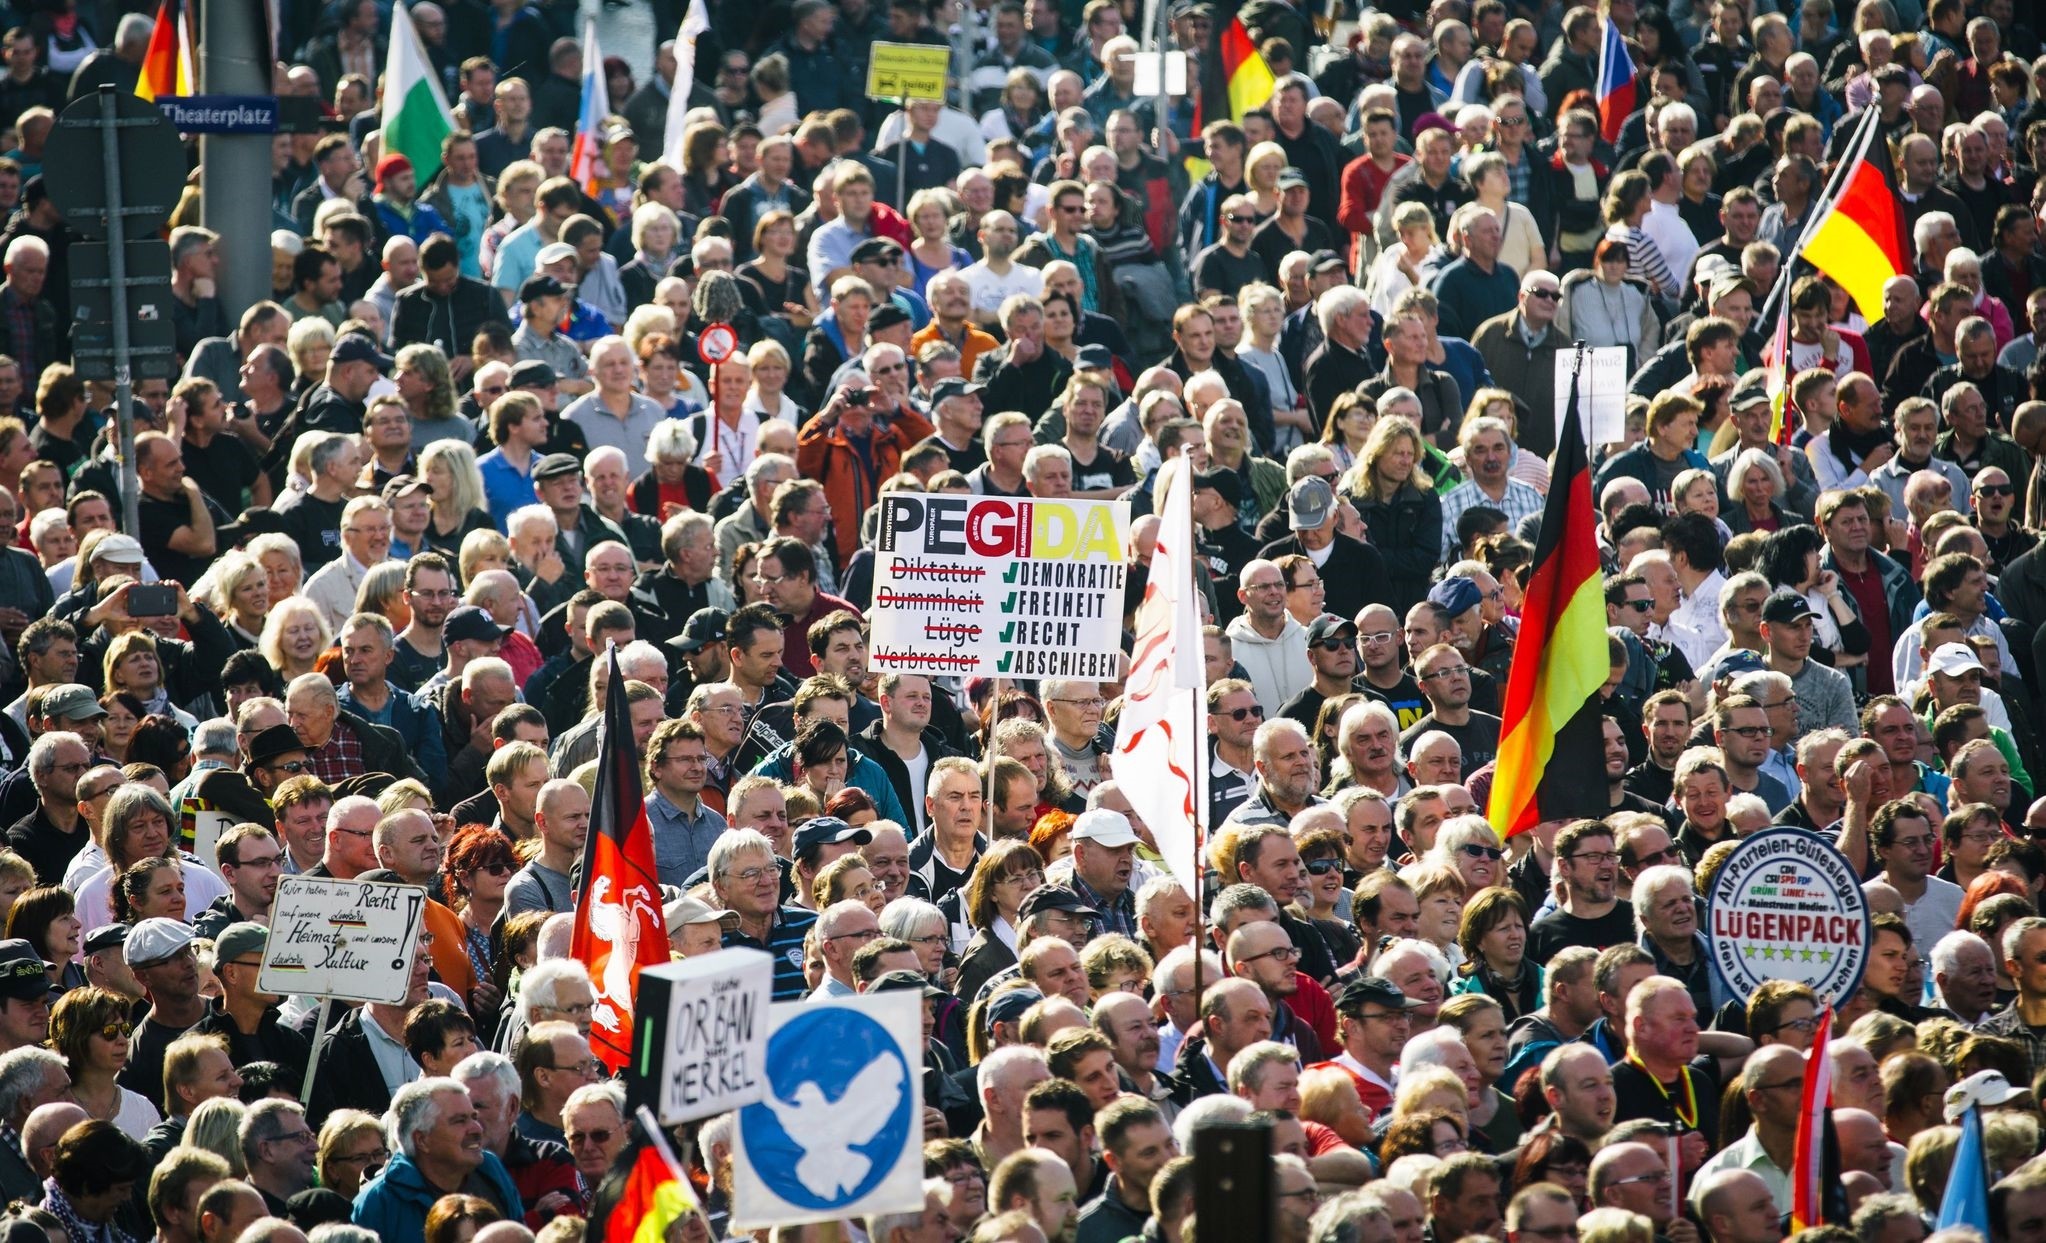 Supporters of the anti-immigrant Pegida movement mark their second year of existence as they demonstrate in Dresden, eastern Germany, on October 16 2016. (AFP Photo)